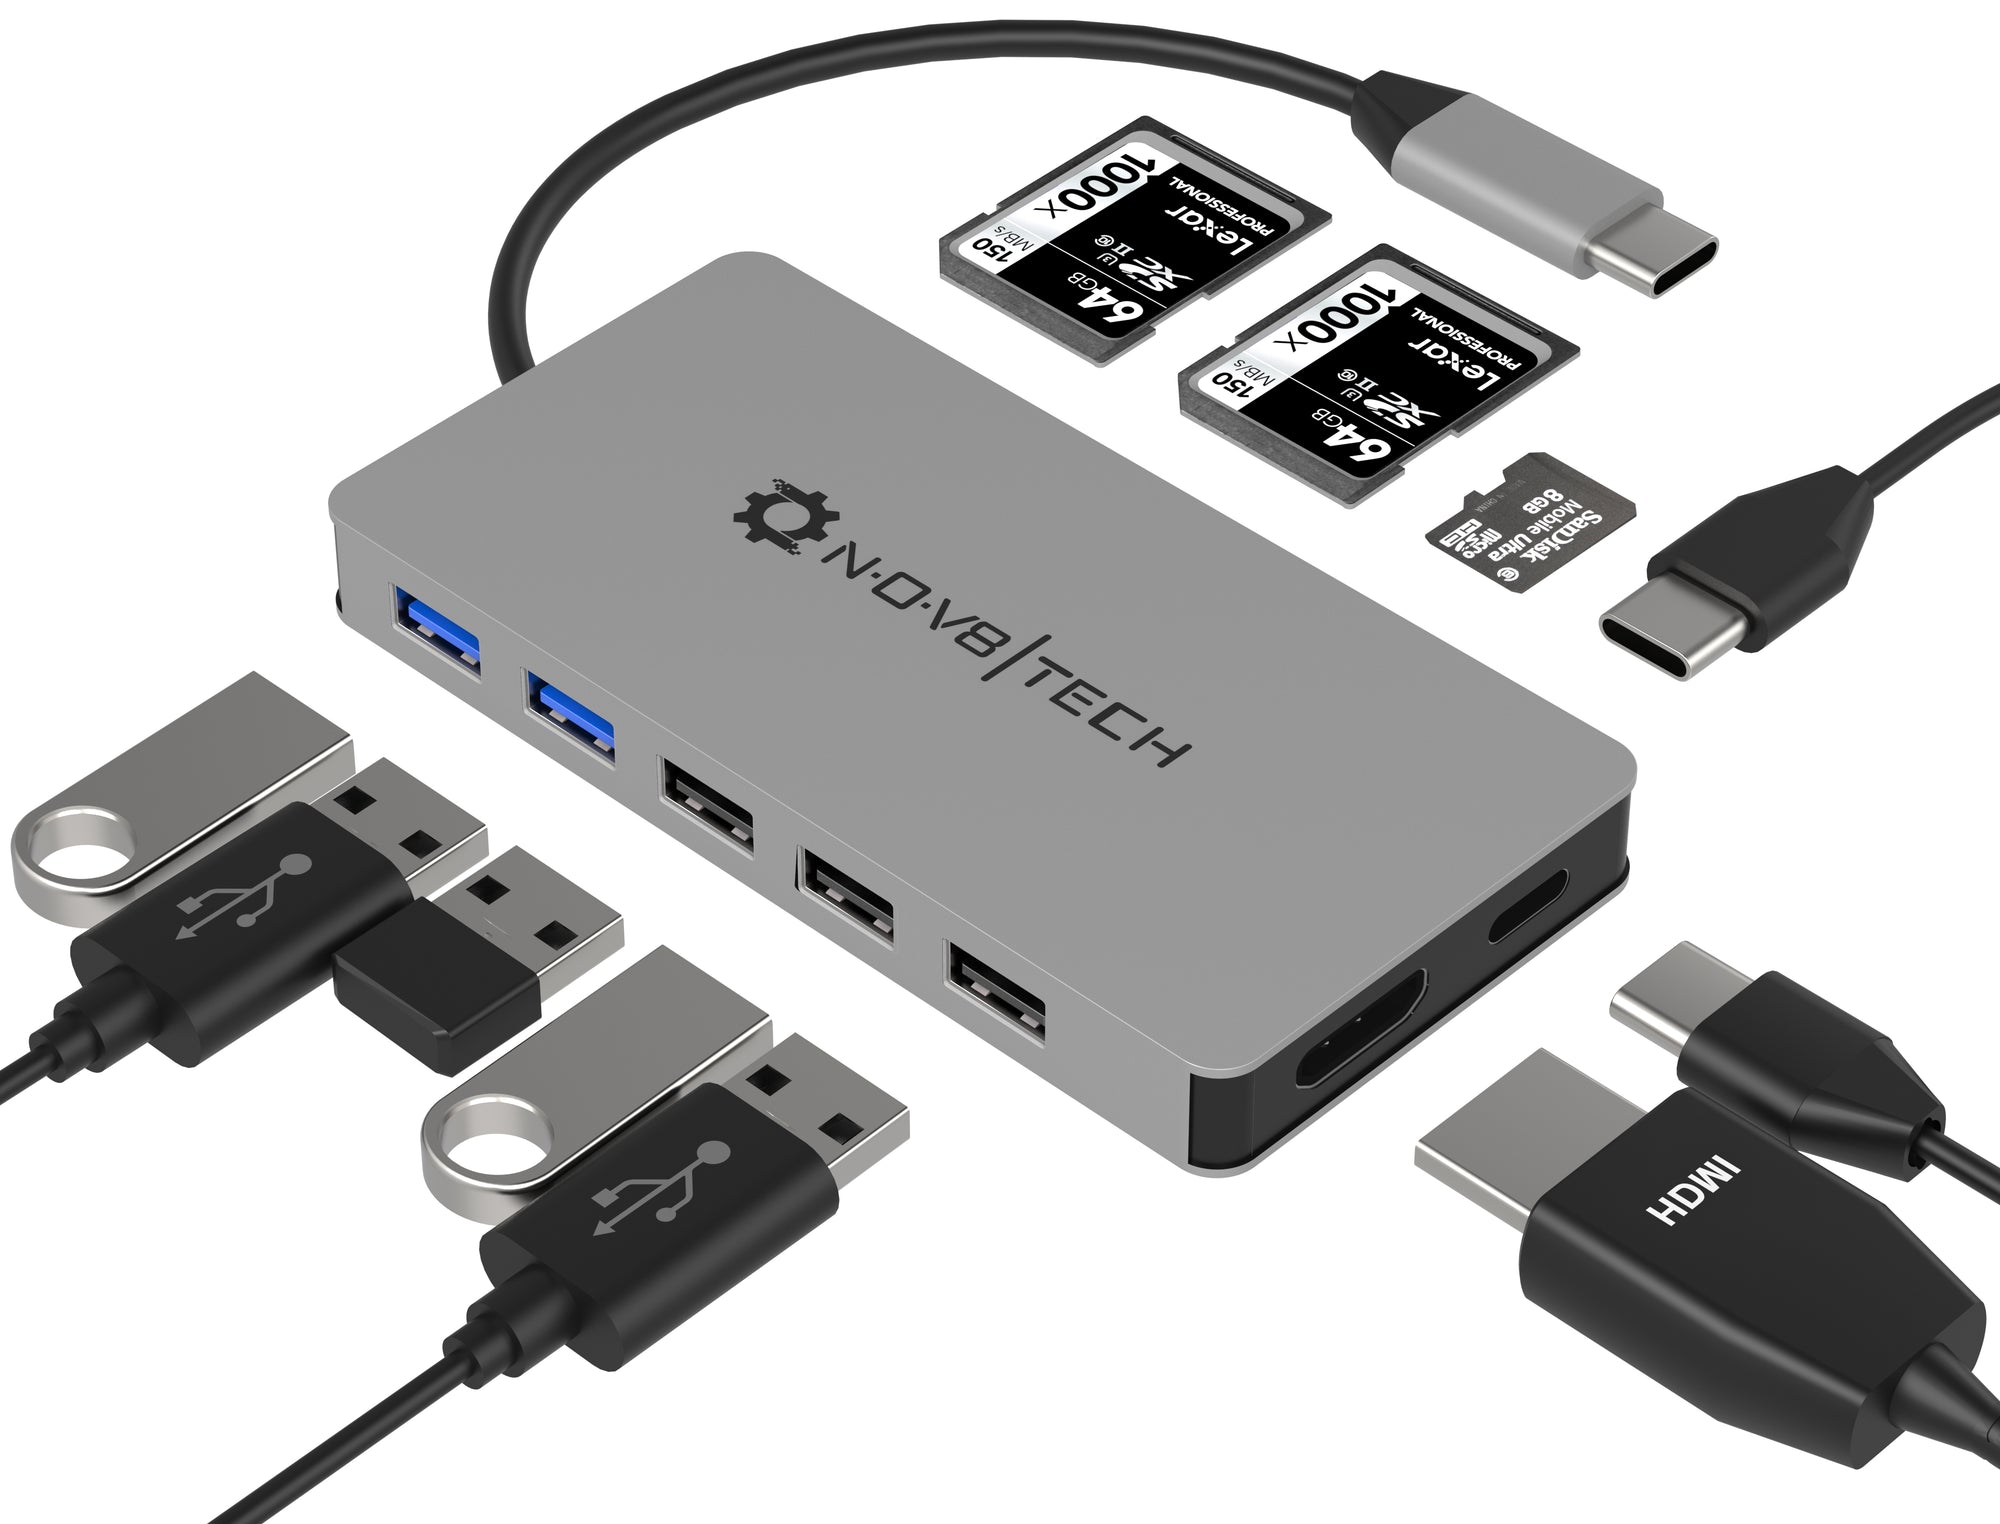 11in1 Space Gray USB C Hub  11 Devices Ports Supported for all Type-C -  NOV8TECH